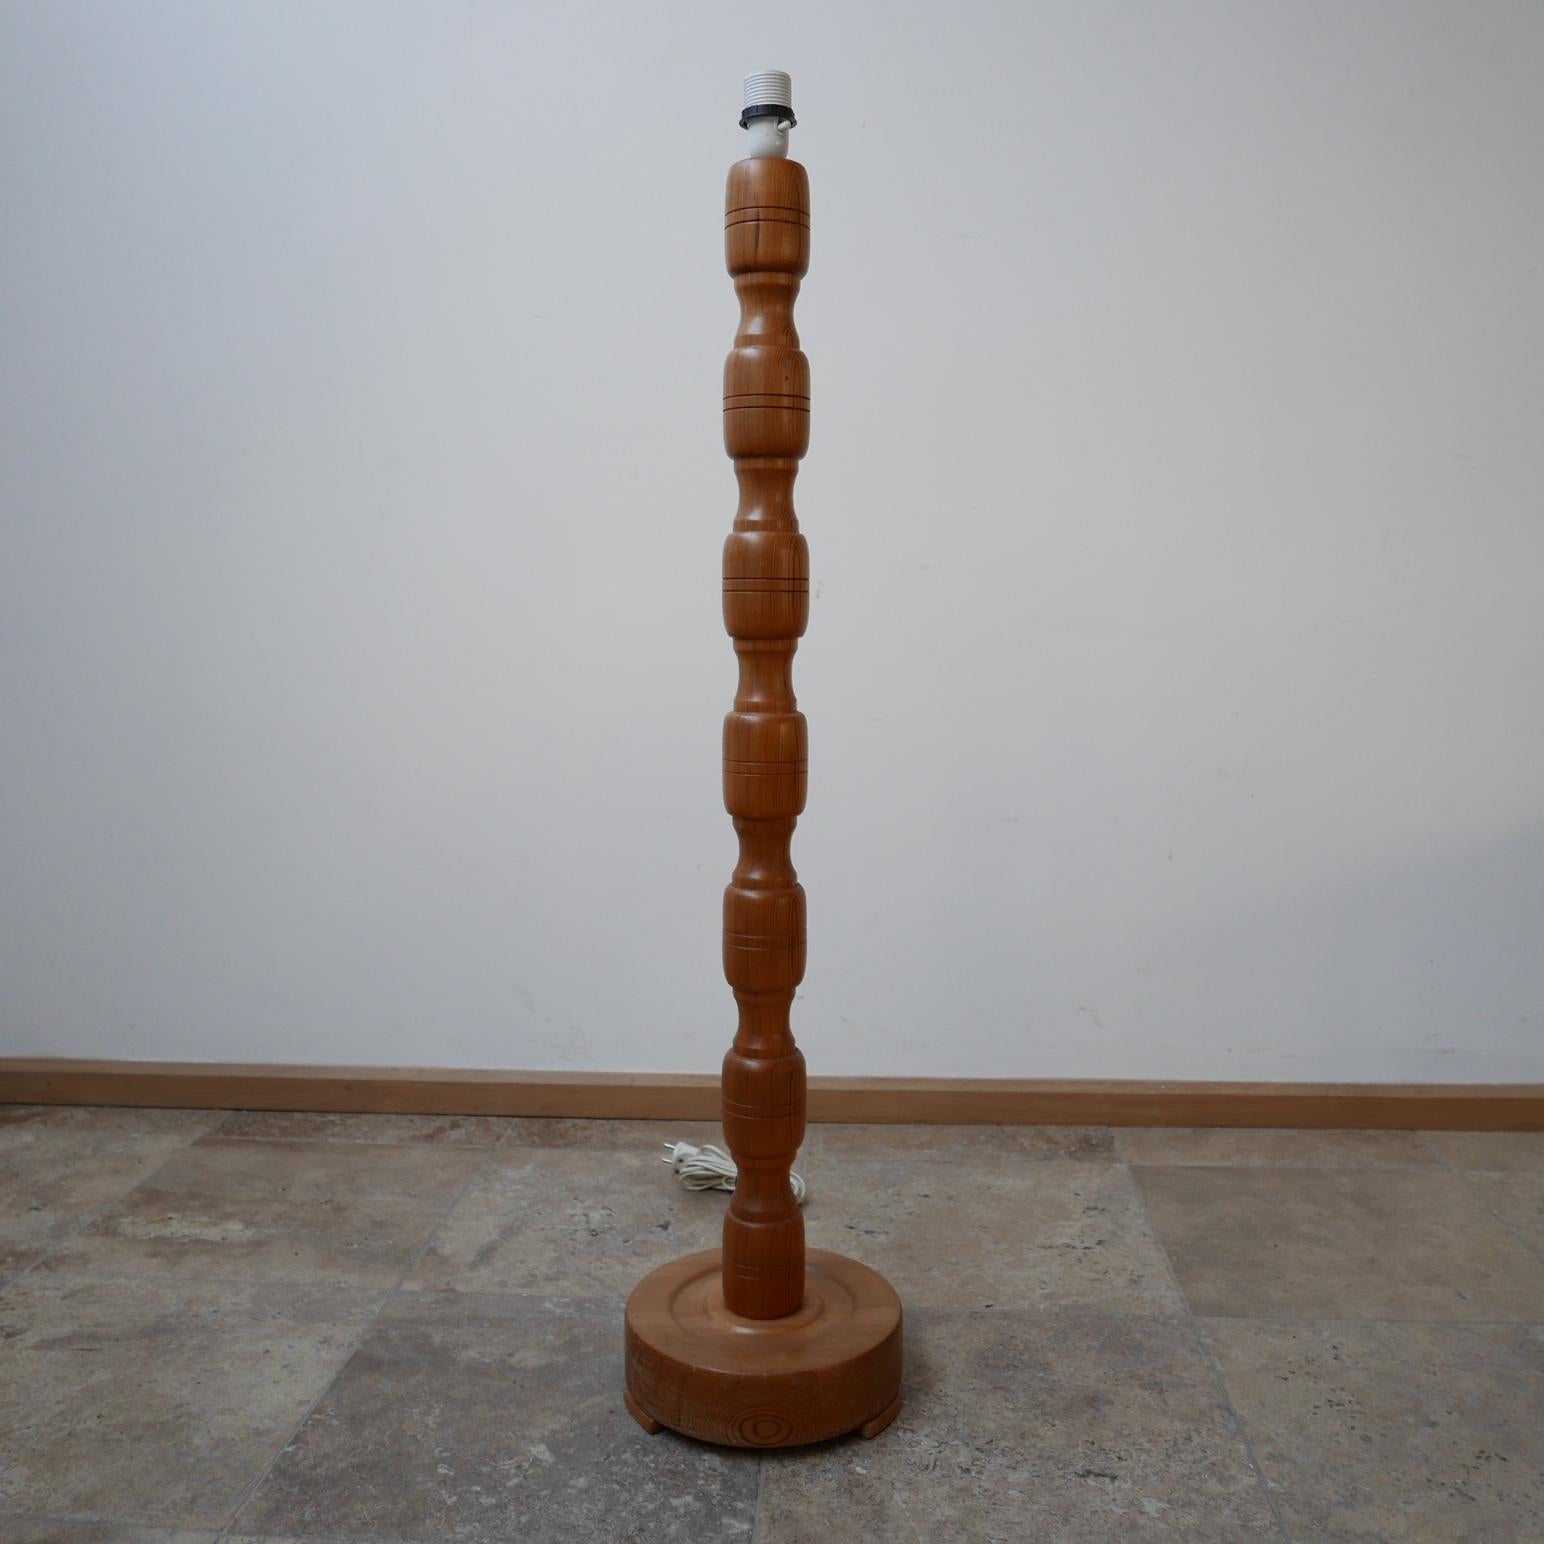 A segmented wooden pine floor lamp.

Sweden, c1970s. 

Simple stylish form. 

Good condition. Some scuffs and wear commensurate with age. 

Since re-wired and PAT tested. 

Location: London Gallery. 

Dimensions: 113 H x 25 Diameter in